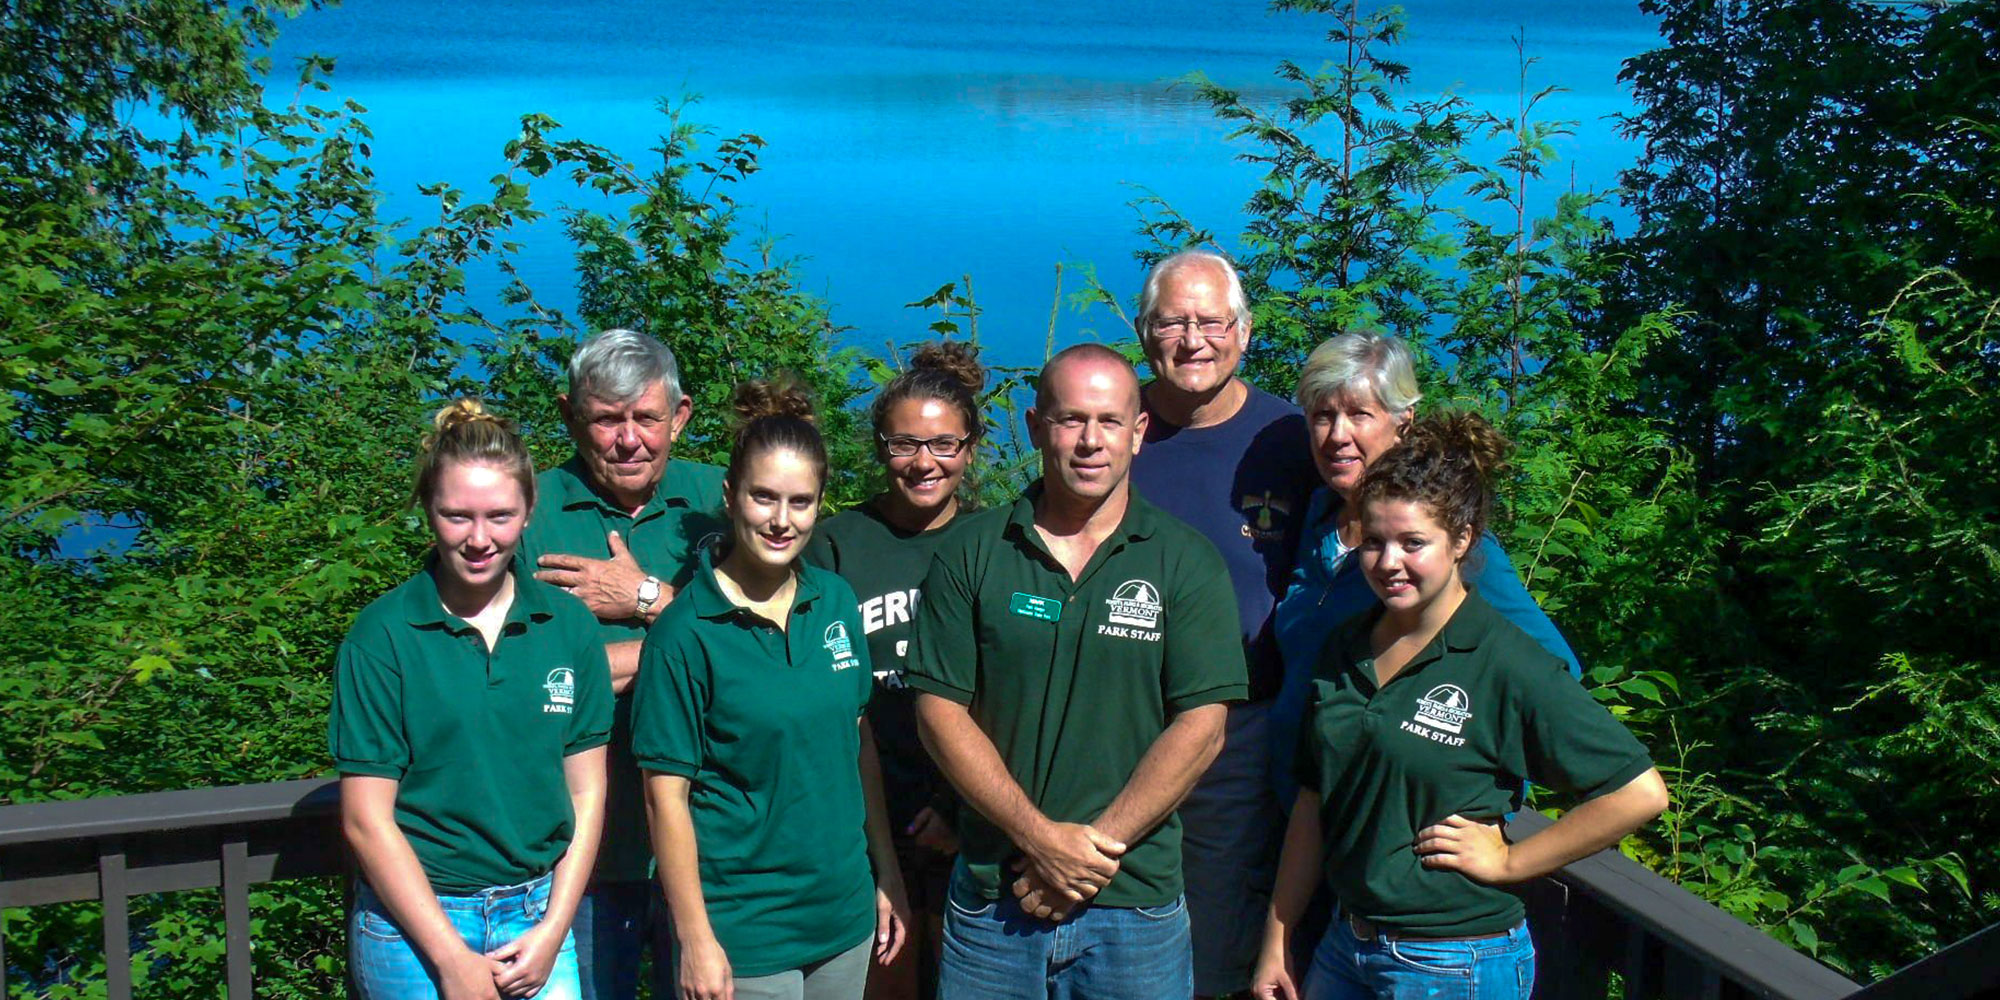 Staff pose in front of a lake